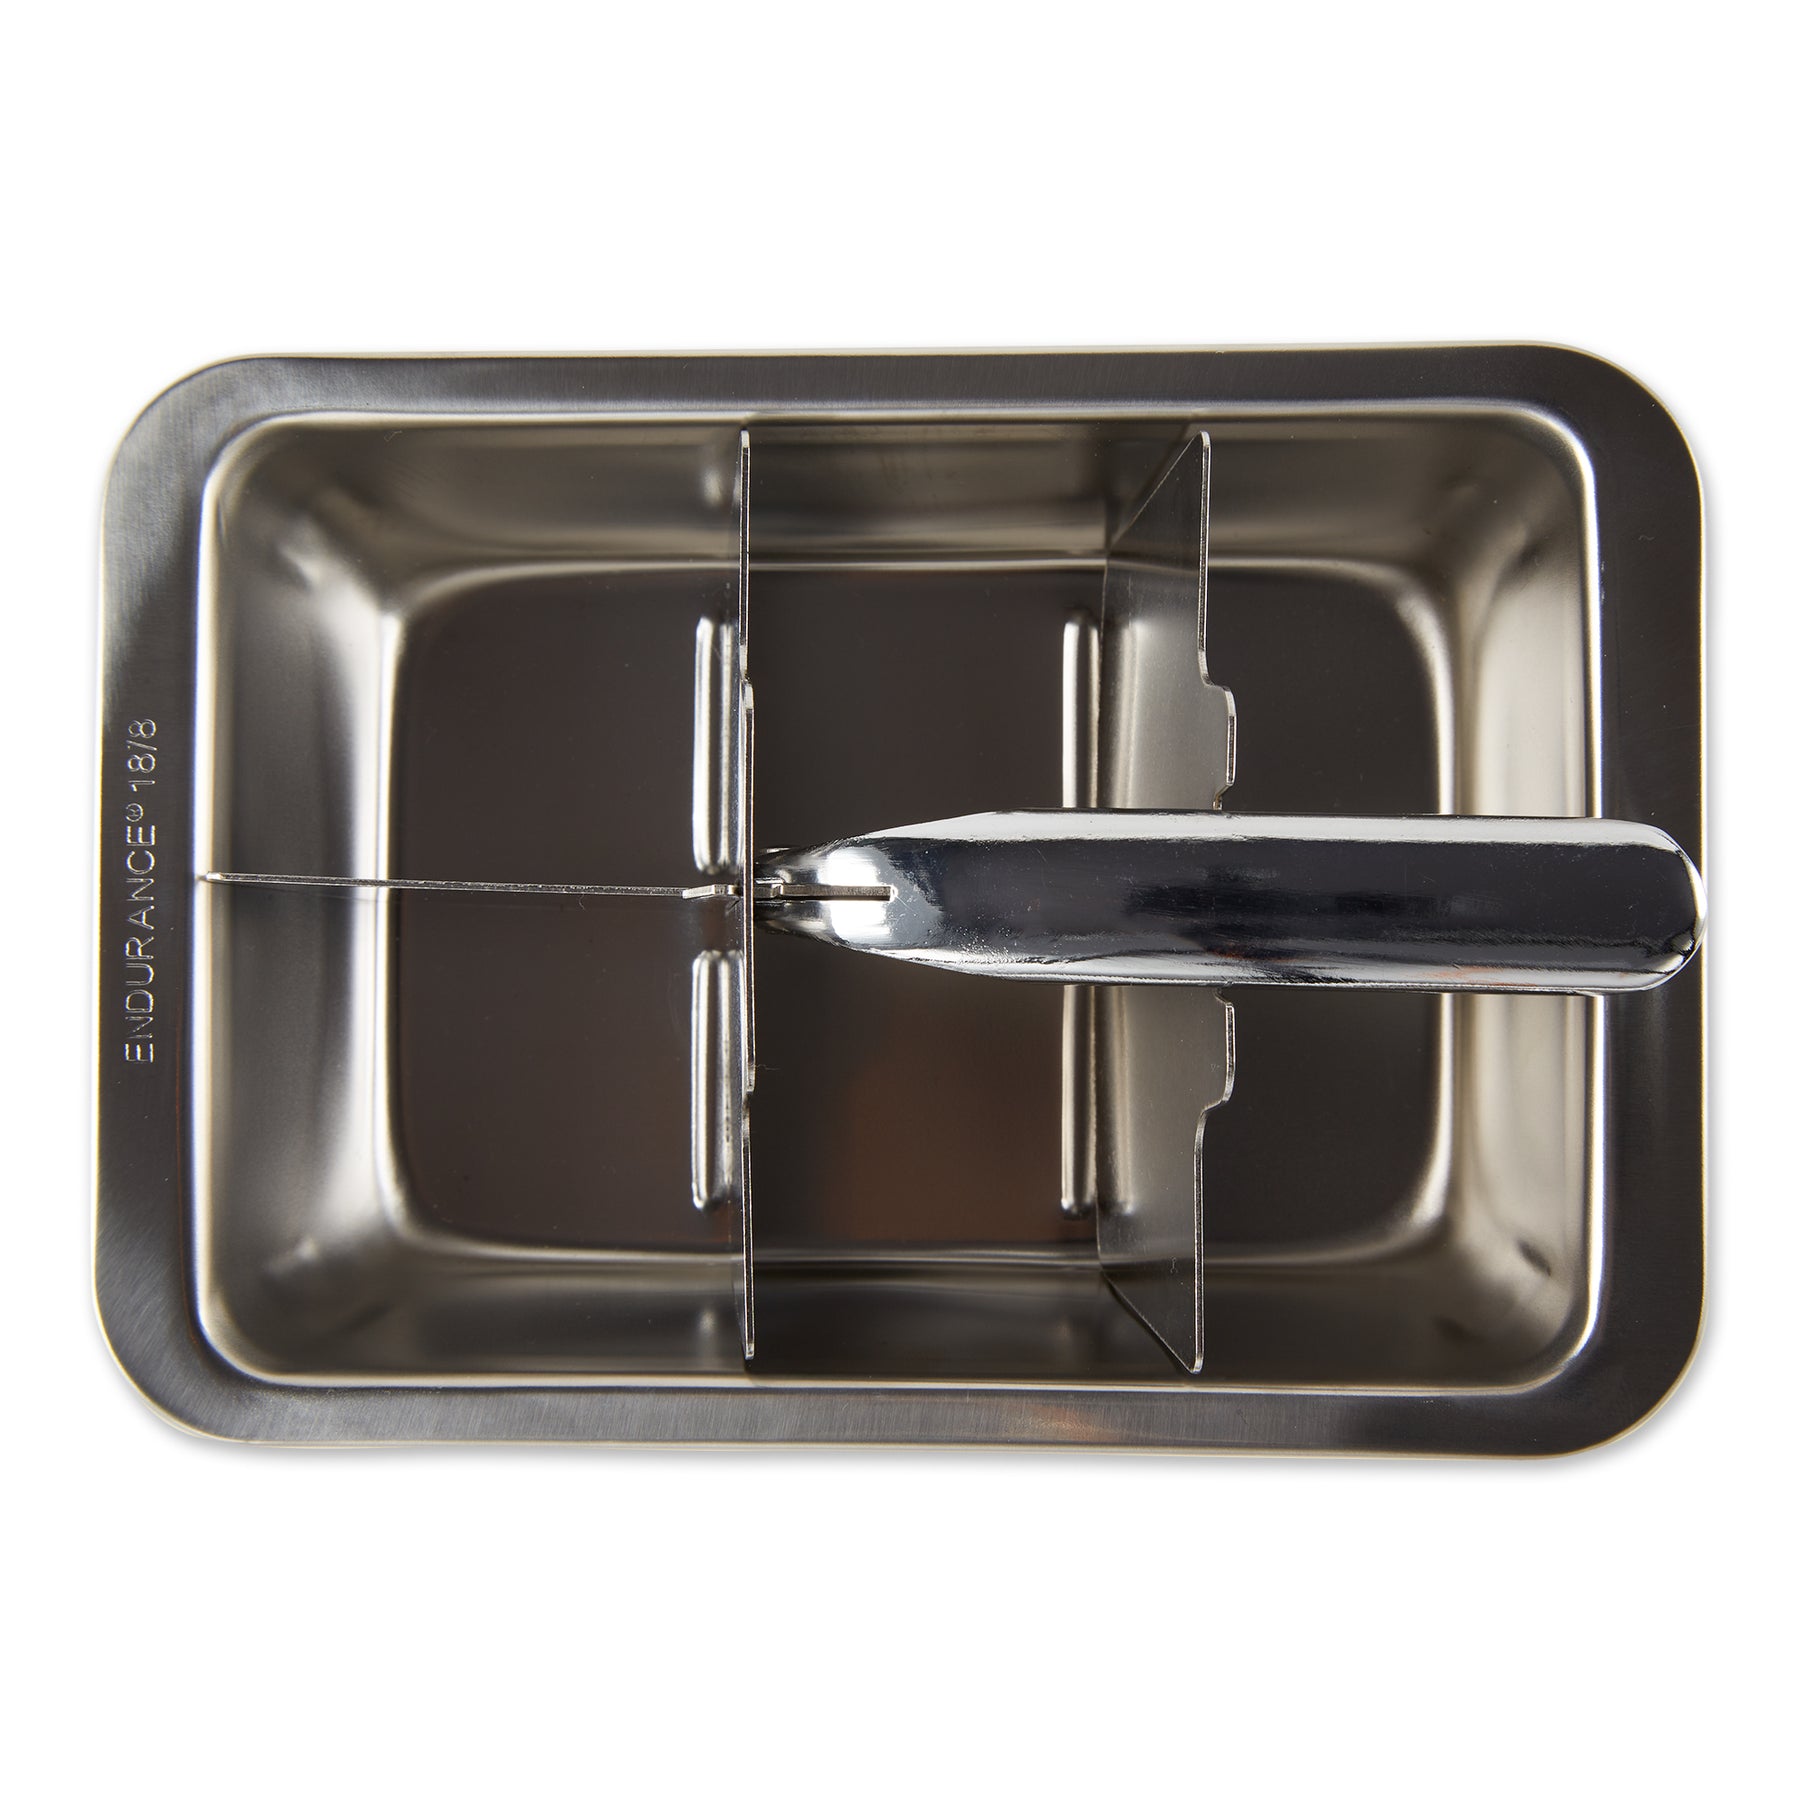 RSVP - ICE CUBE TRAY - LARGE, Z.W. Mercantile